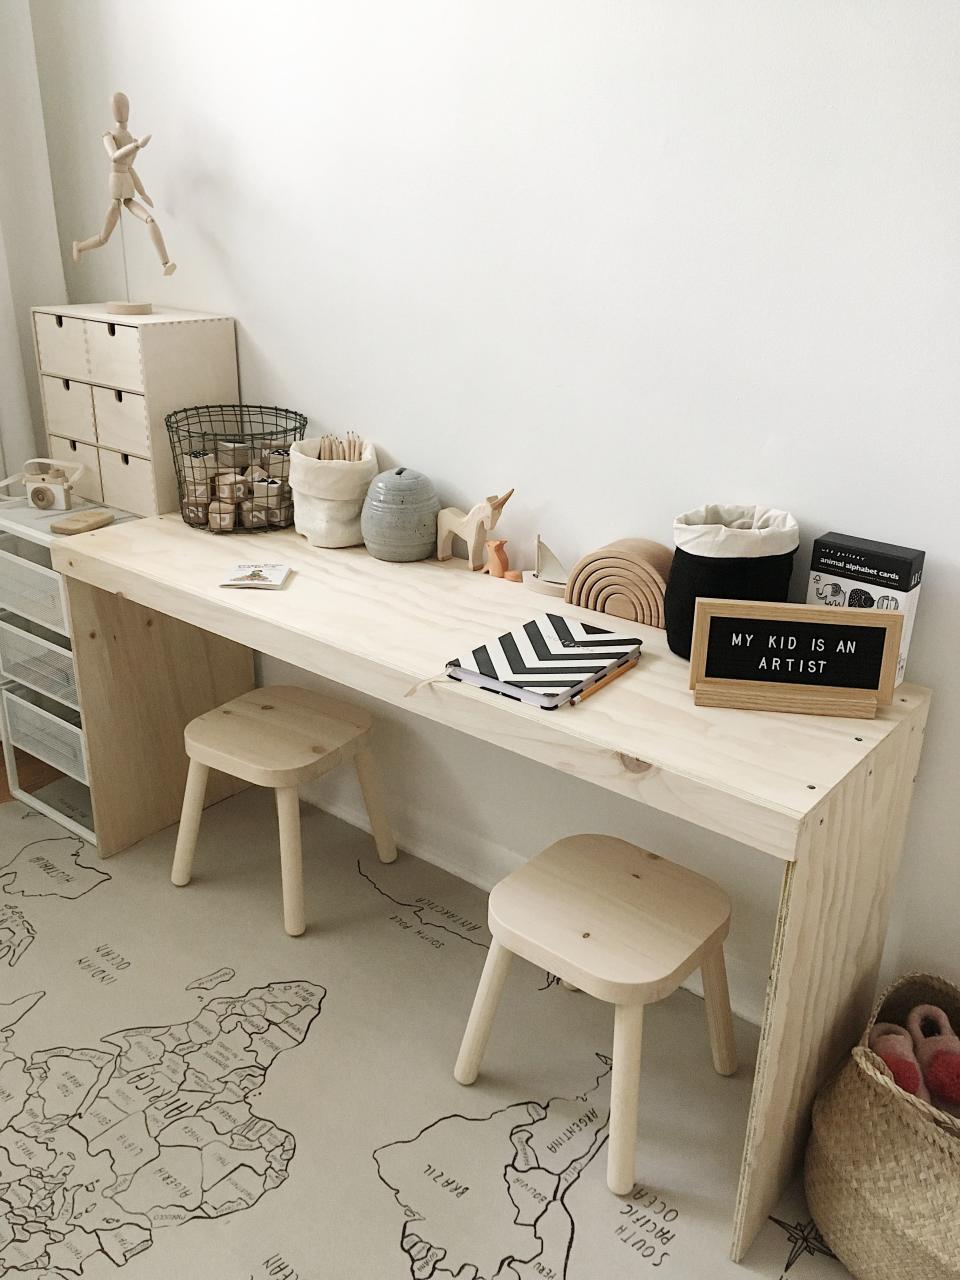 9) Keep It Simple with an Unfinished Wood Desk and Stools